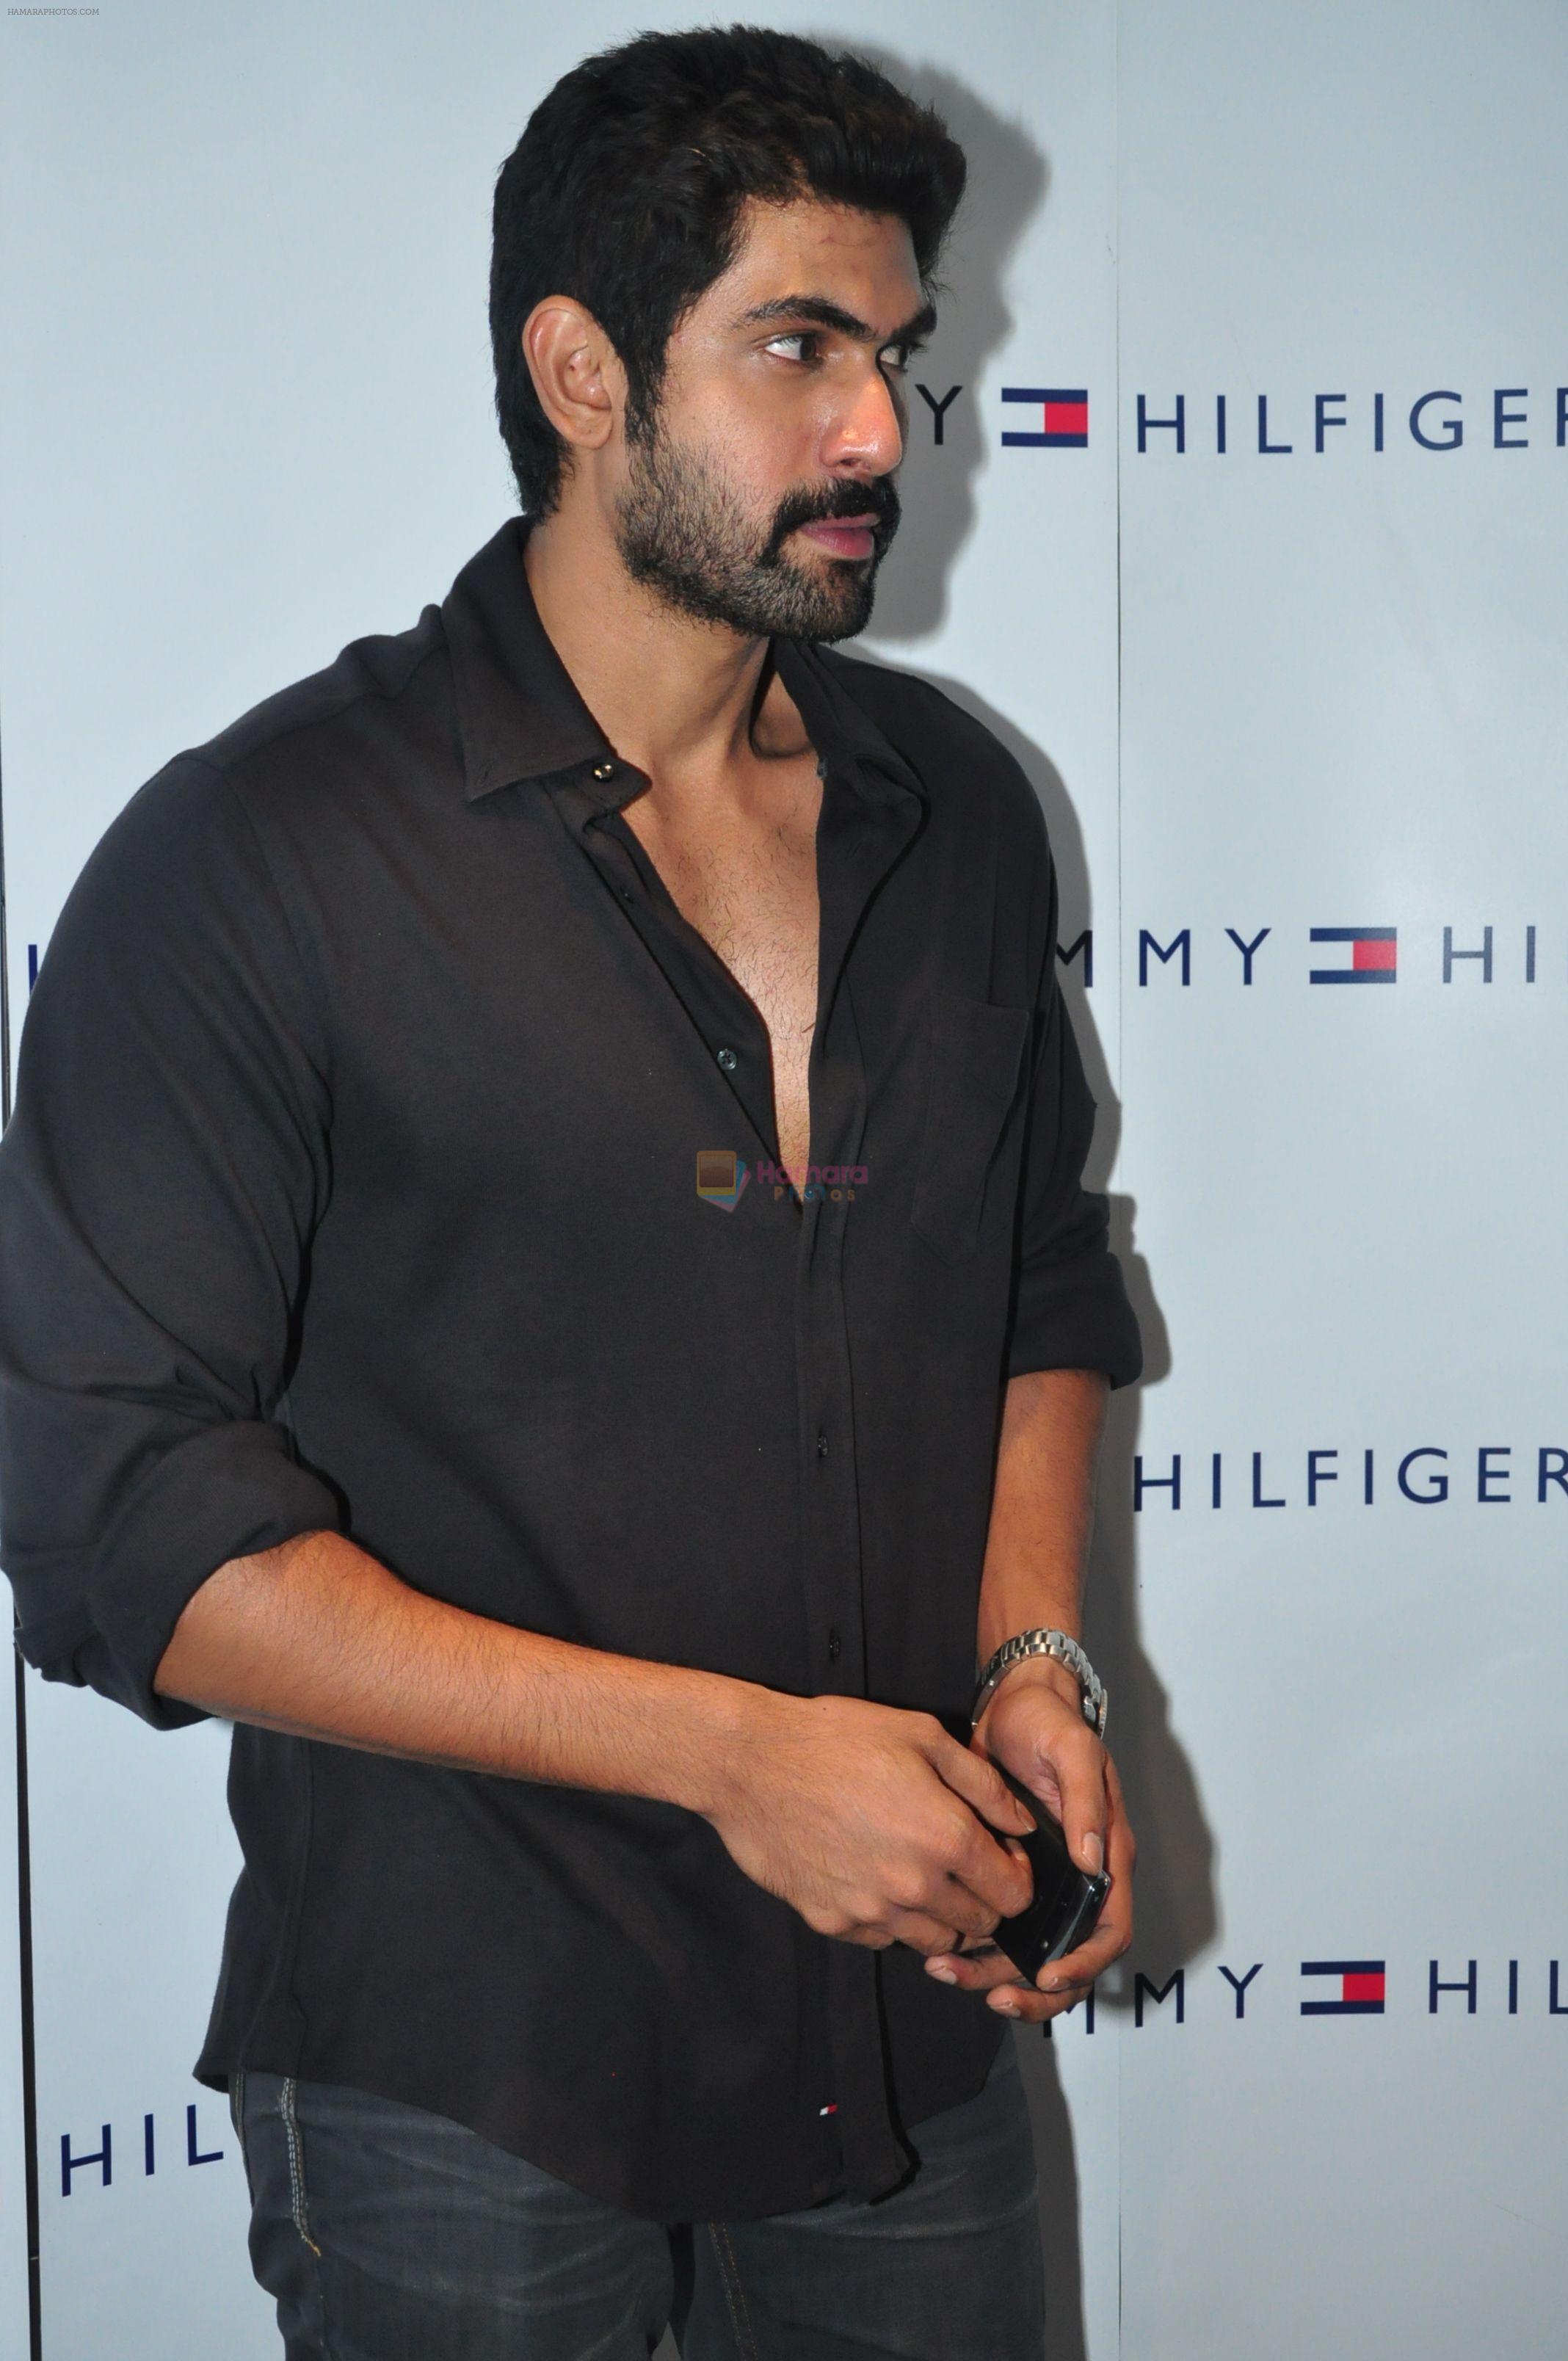 Rana Daggubati attends Tommy Hilfiger Showroom Relaunch Party held at  Kismet Pub, Park Hotel, Hyderabad on 17th September 2011 / Most Viewed  Bollywood Photos - Bollywood Photos